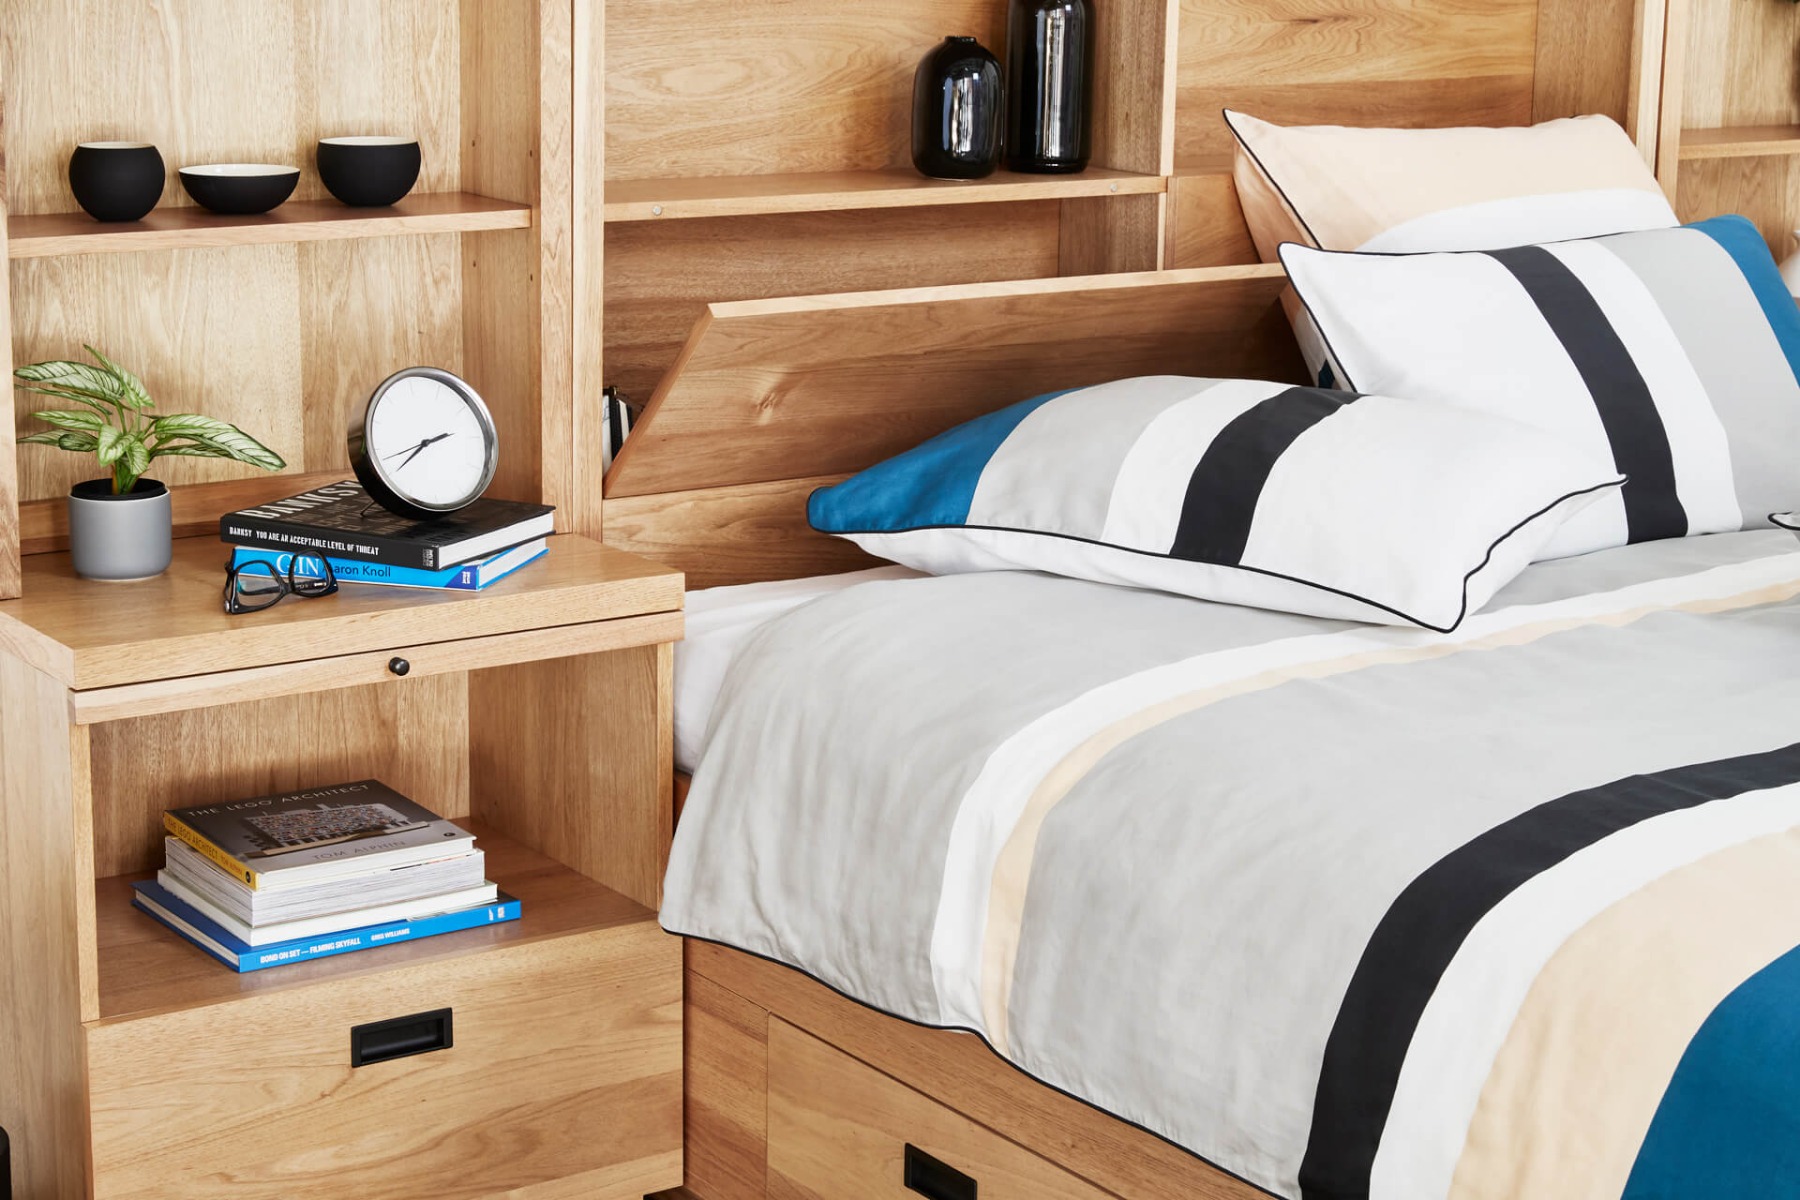 Timber bedhead with hidden storage